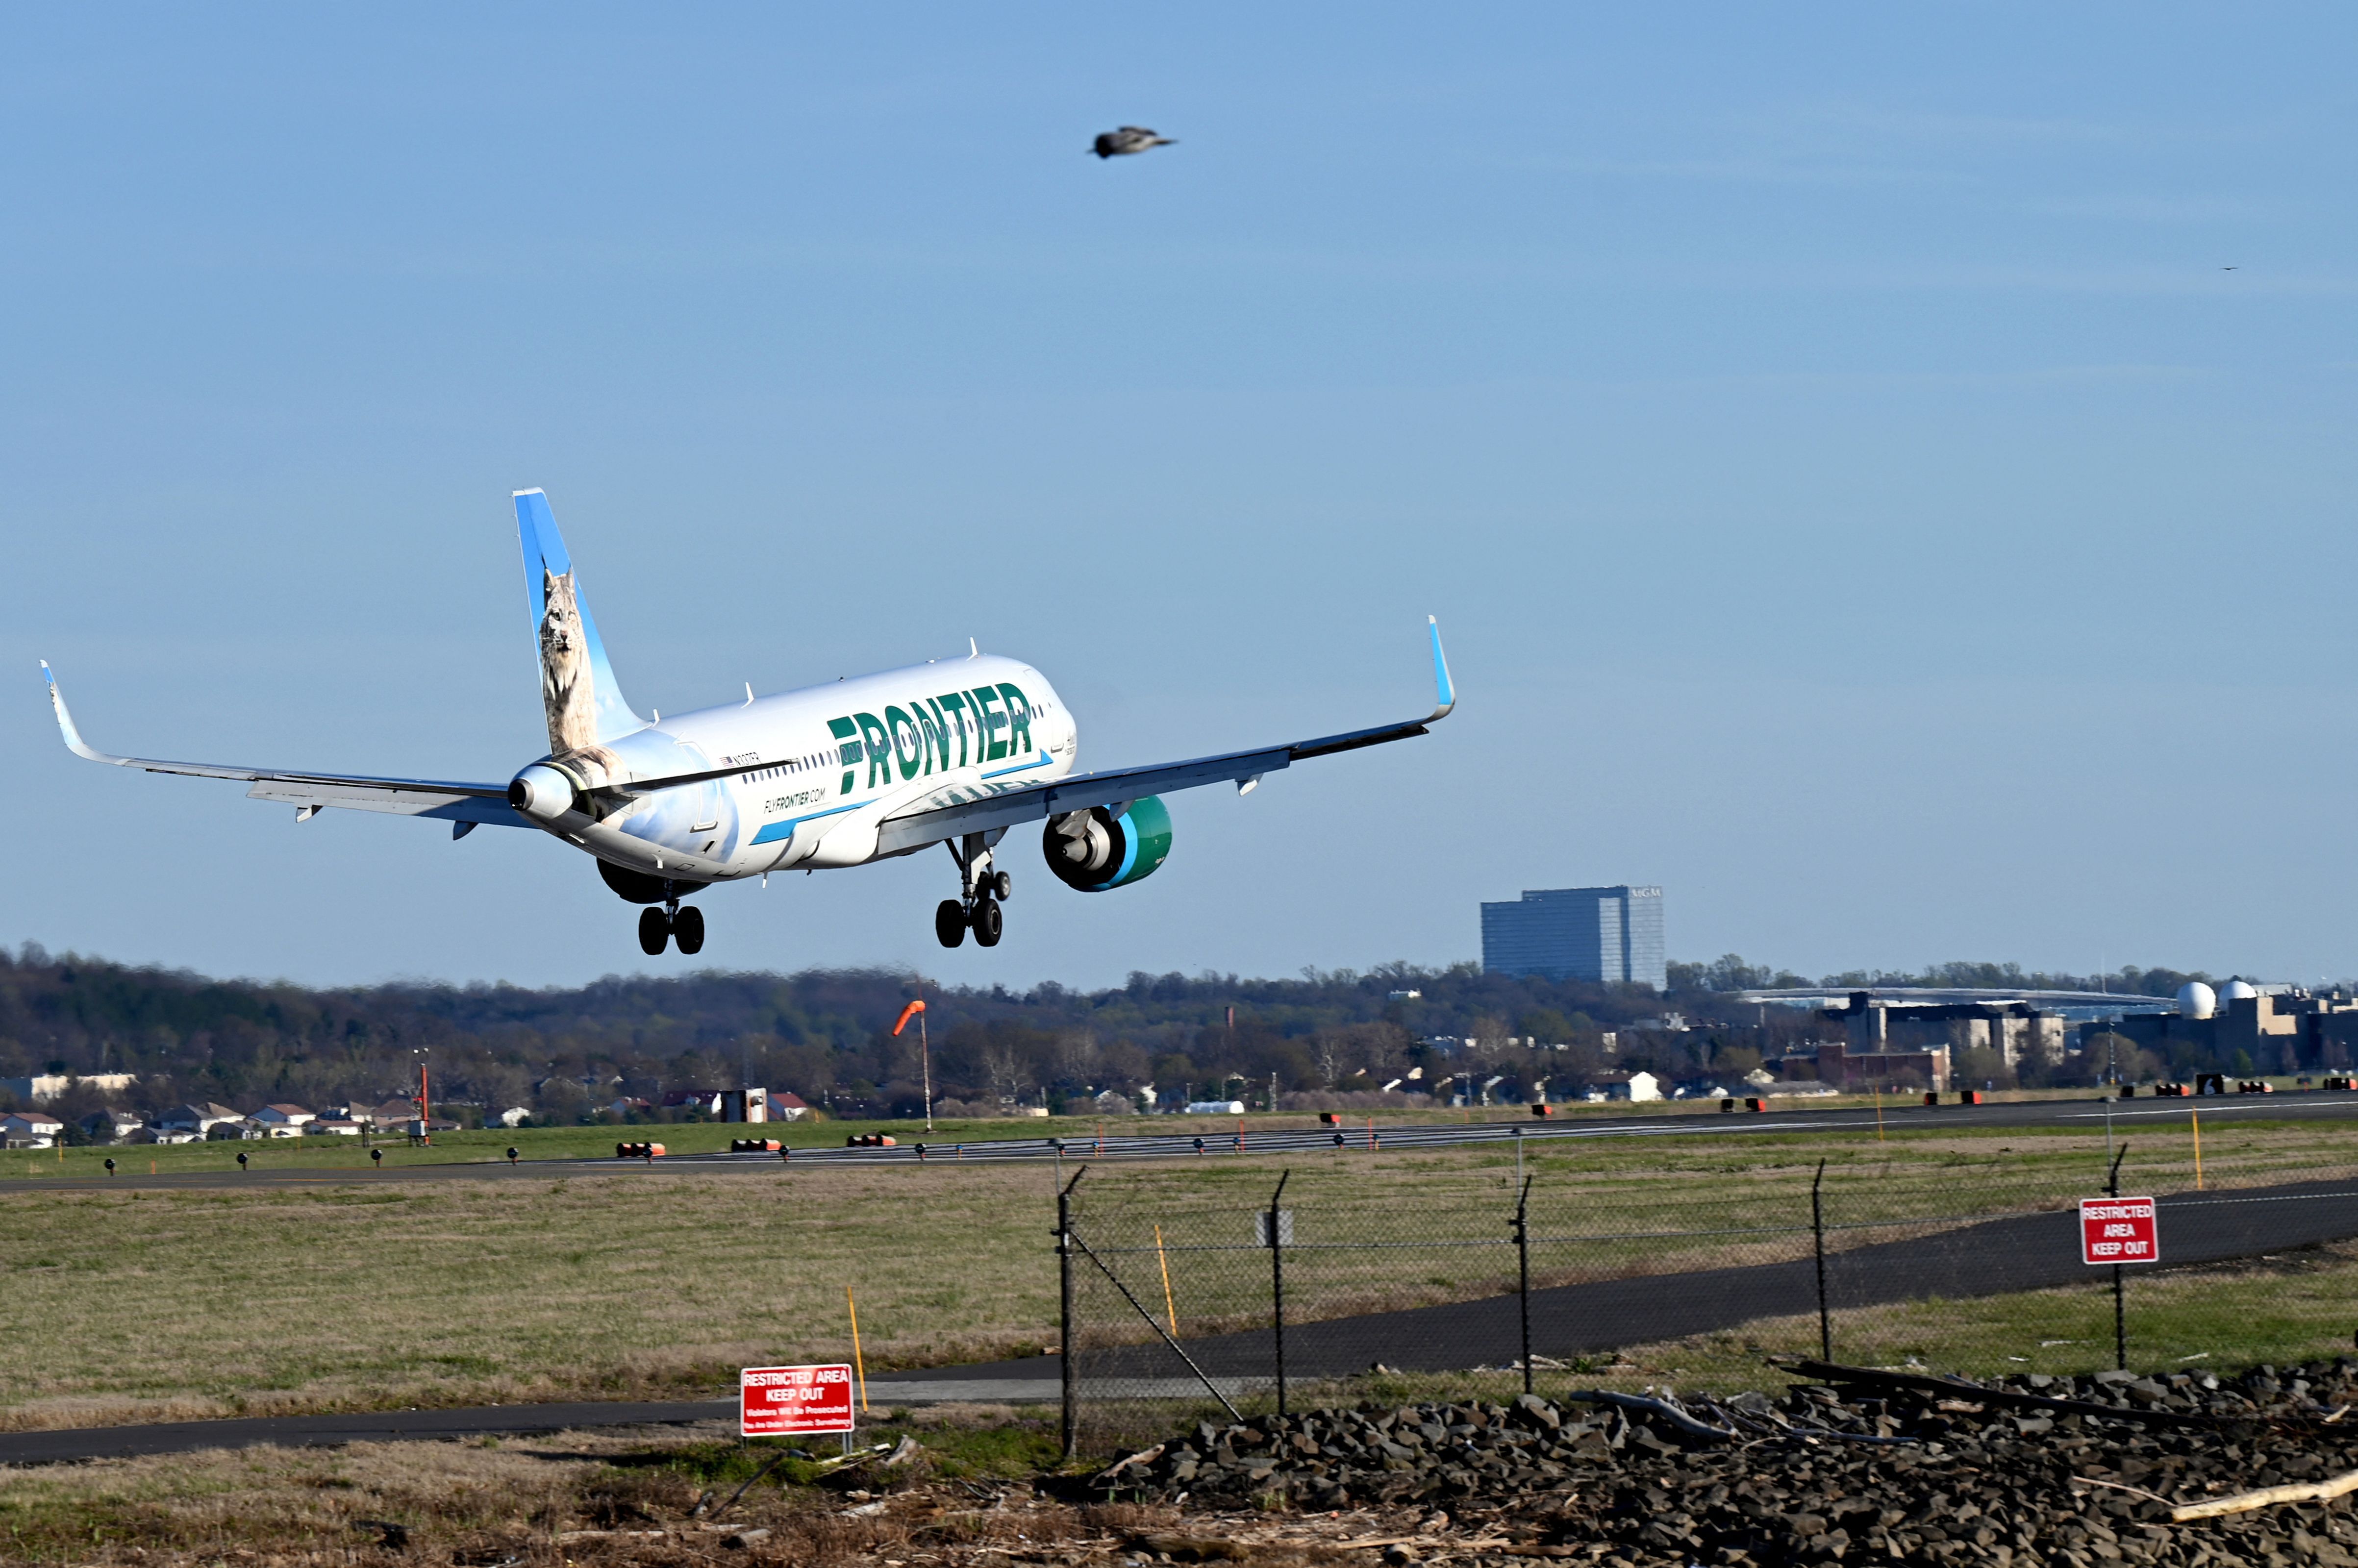 Frontier Airlines A320NEO on approach.